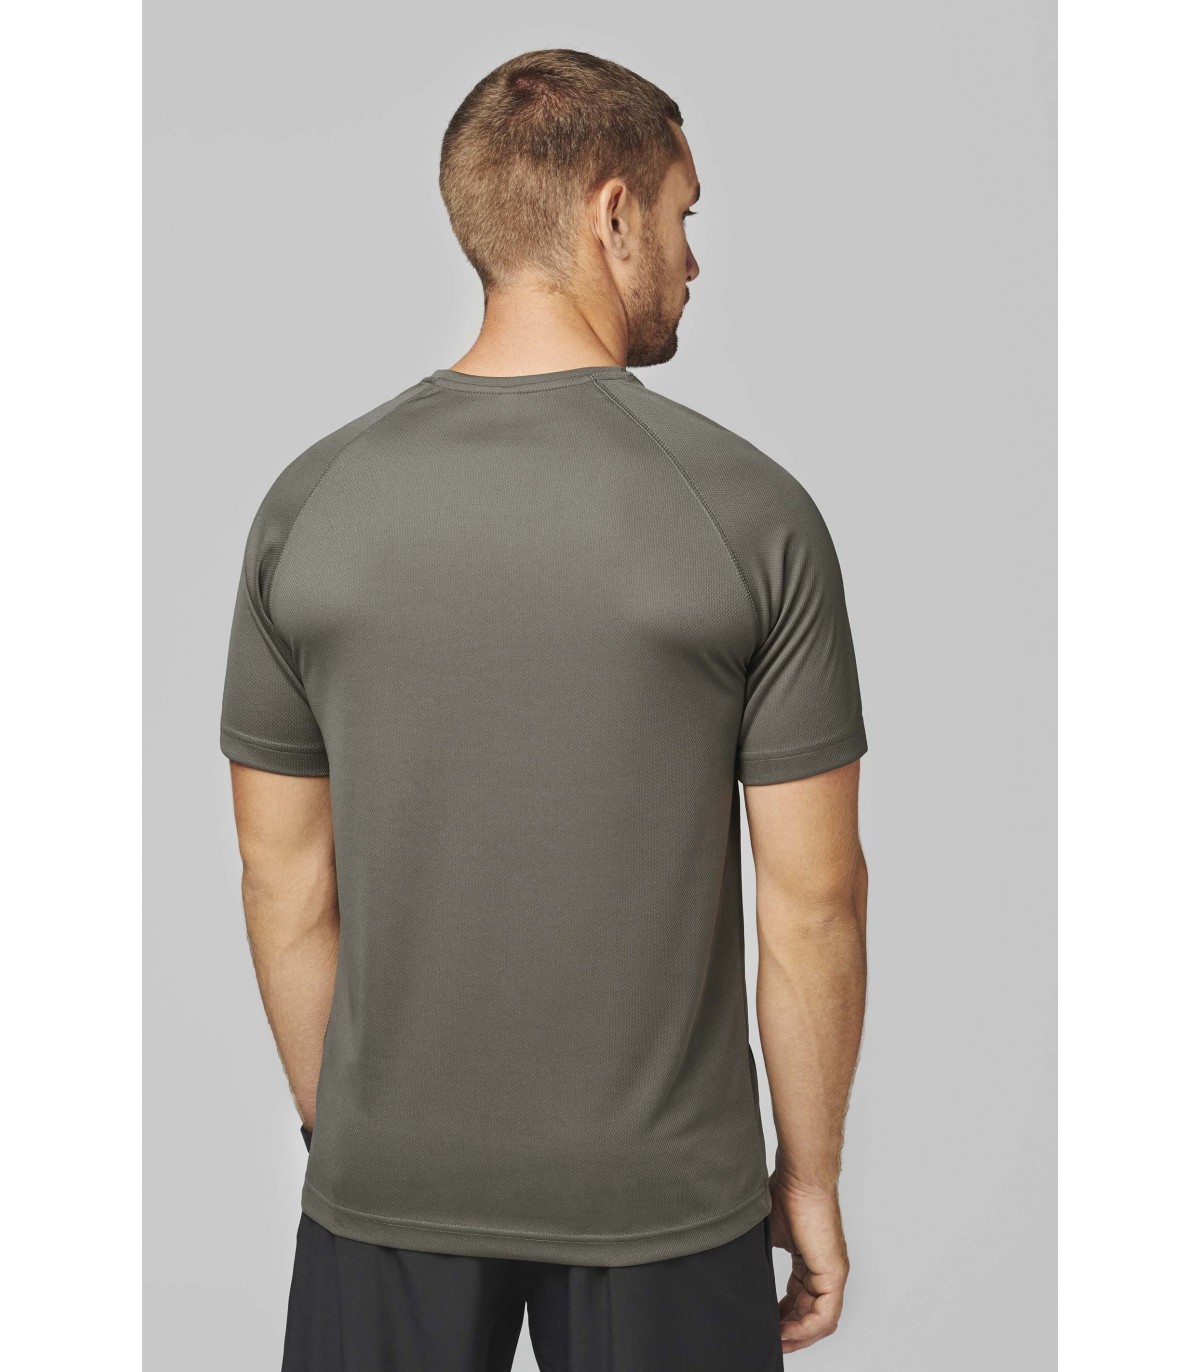 Tshirt Homme PA438 Polyester Tissu léger